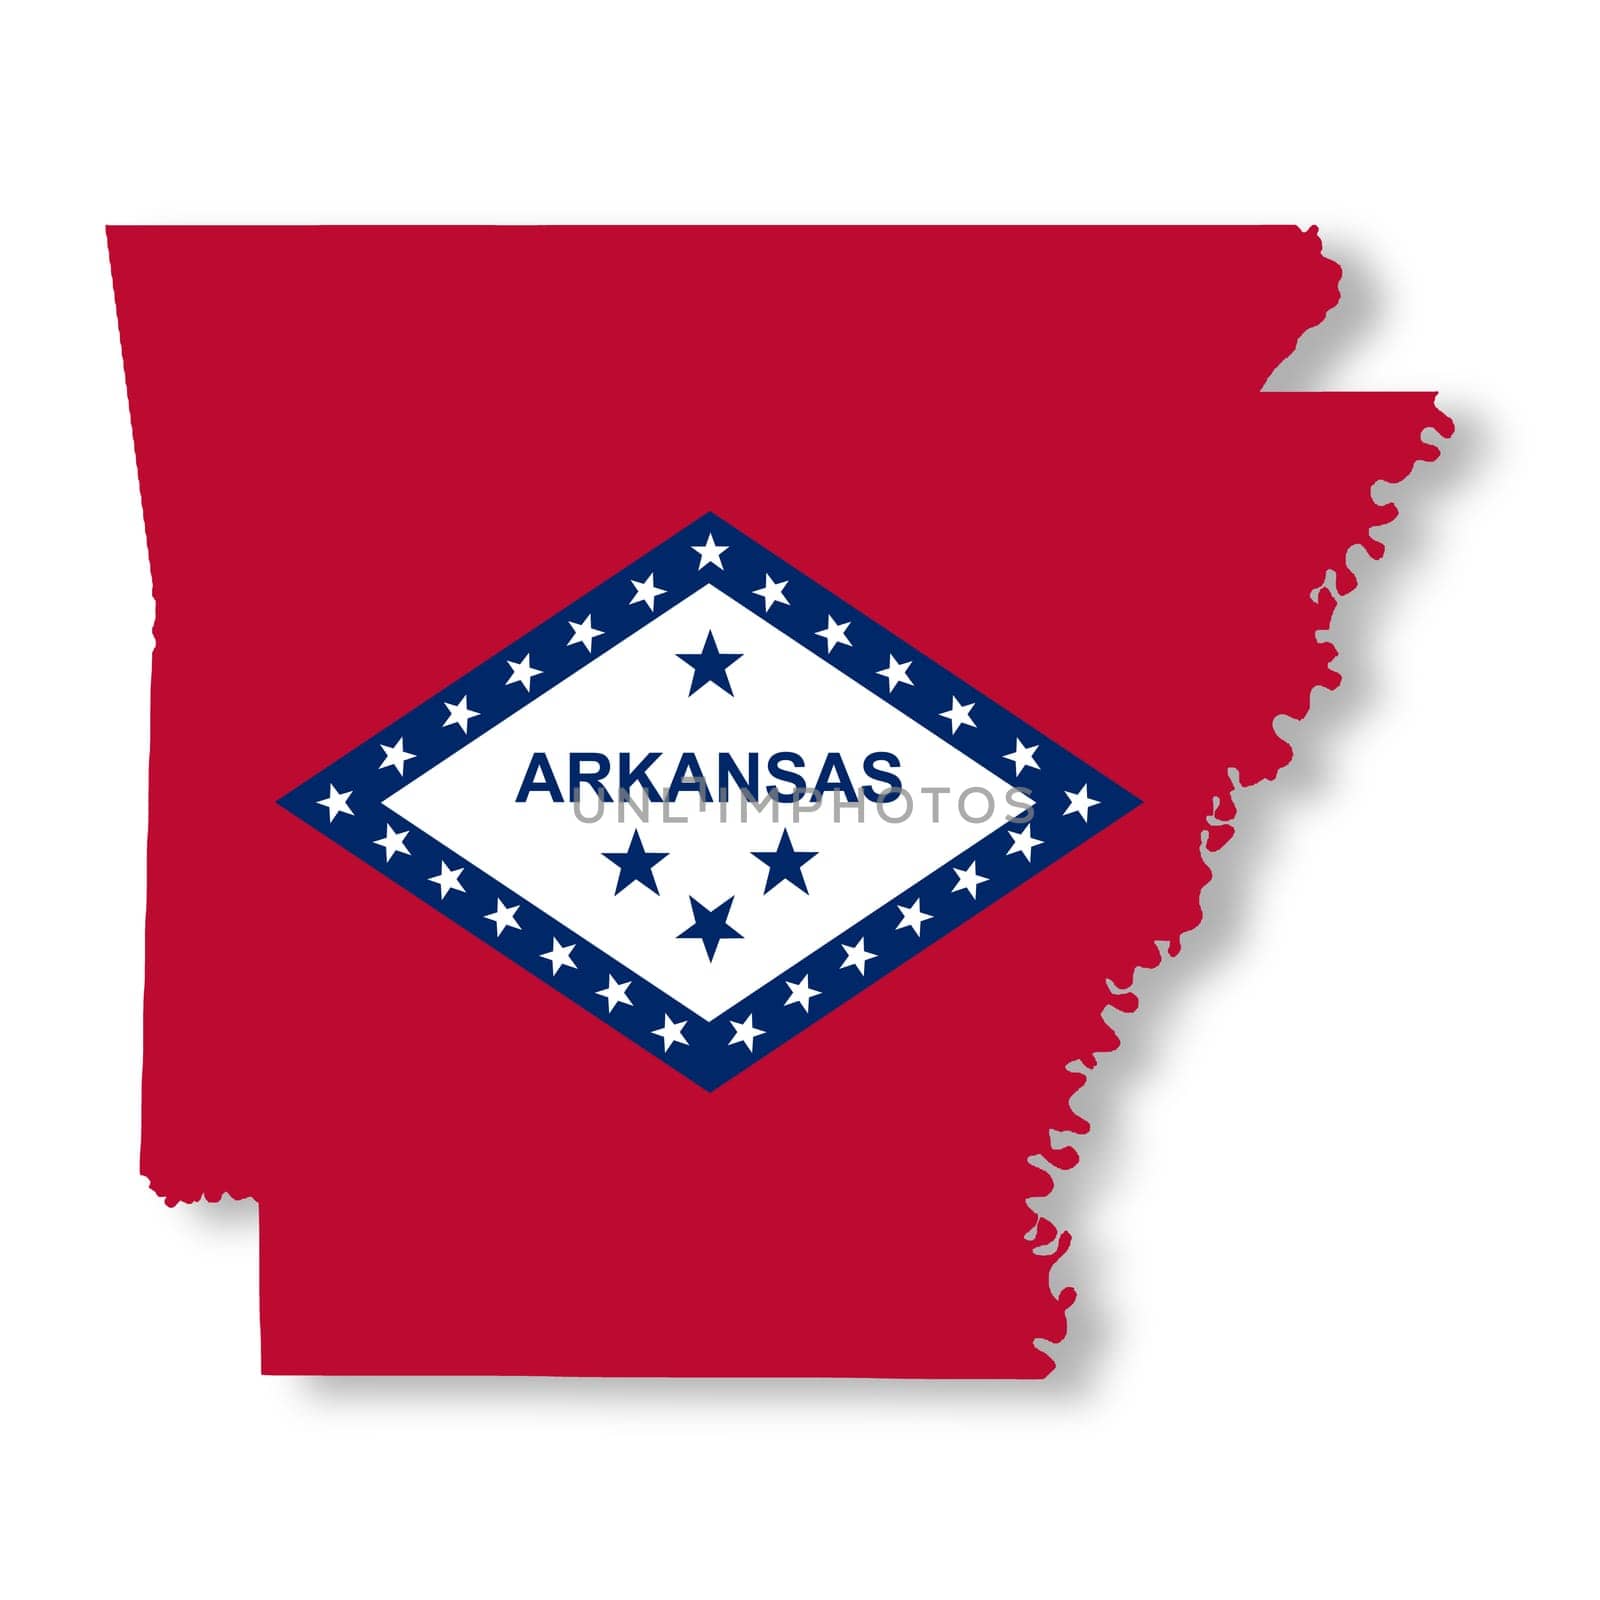 Arkansas State Flag Map Illustration with clipping path by VivacityImages